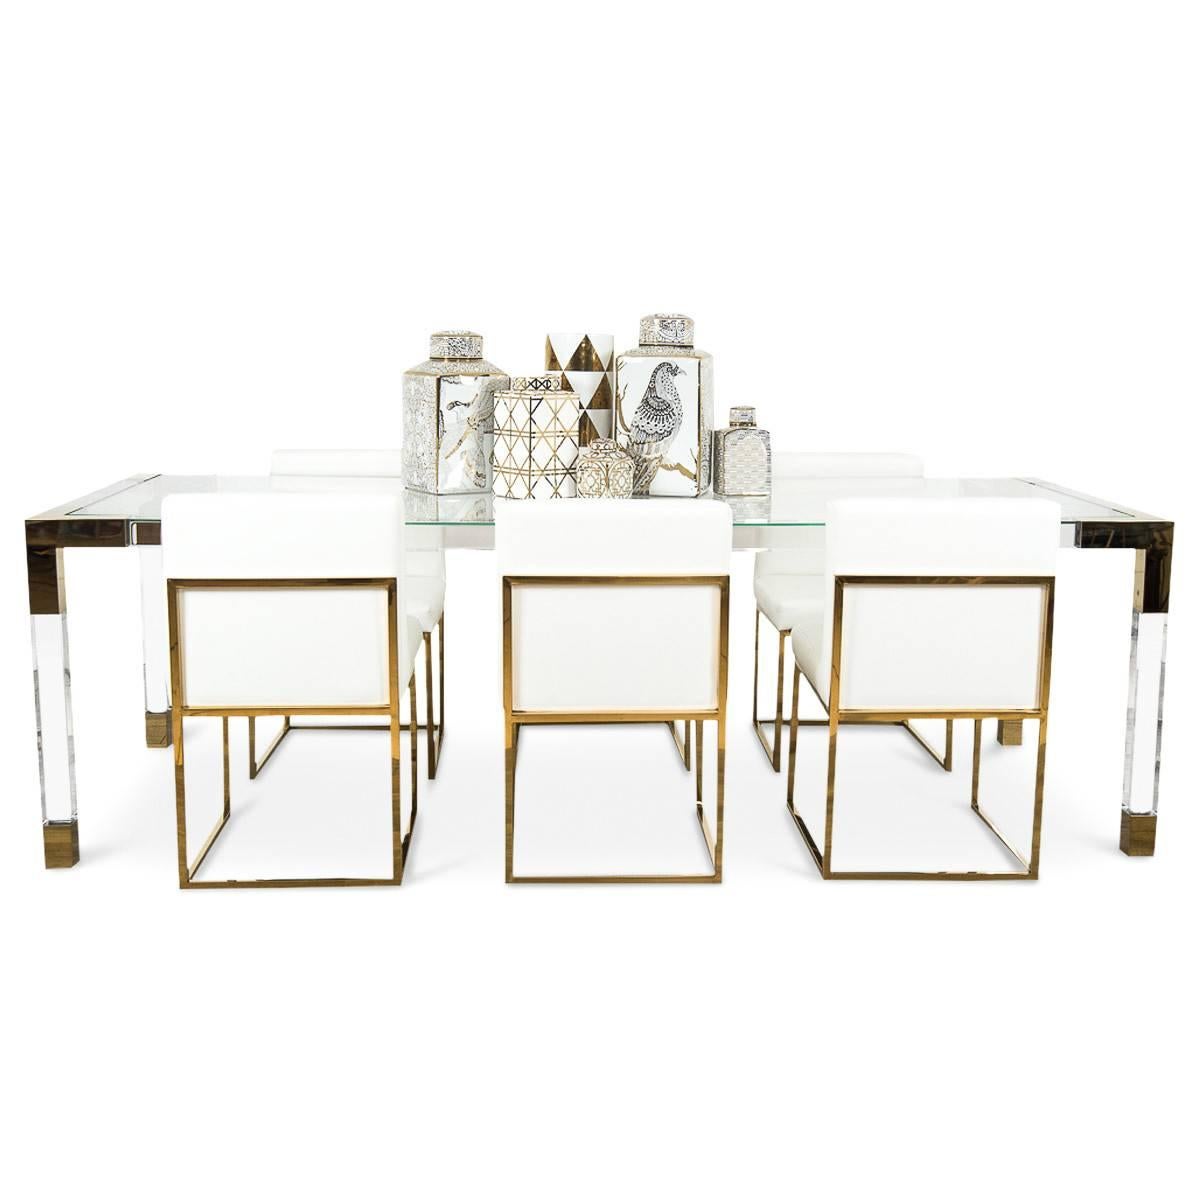 Chinese Mid-Century Modern Style Lucite Dining Table w/ Brass Accents and Glass Top